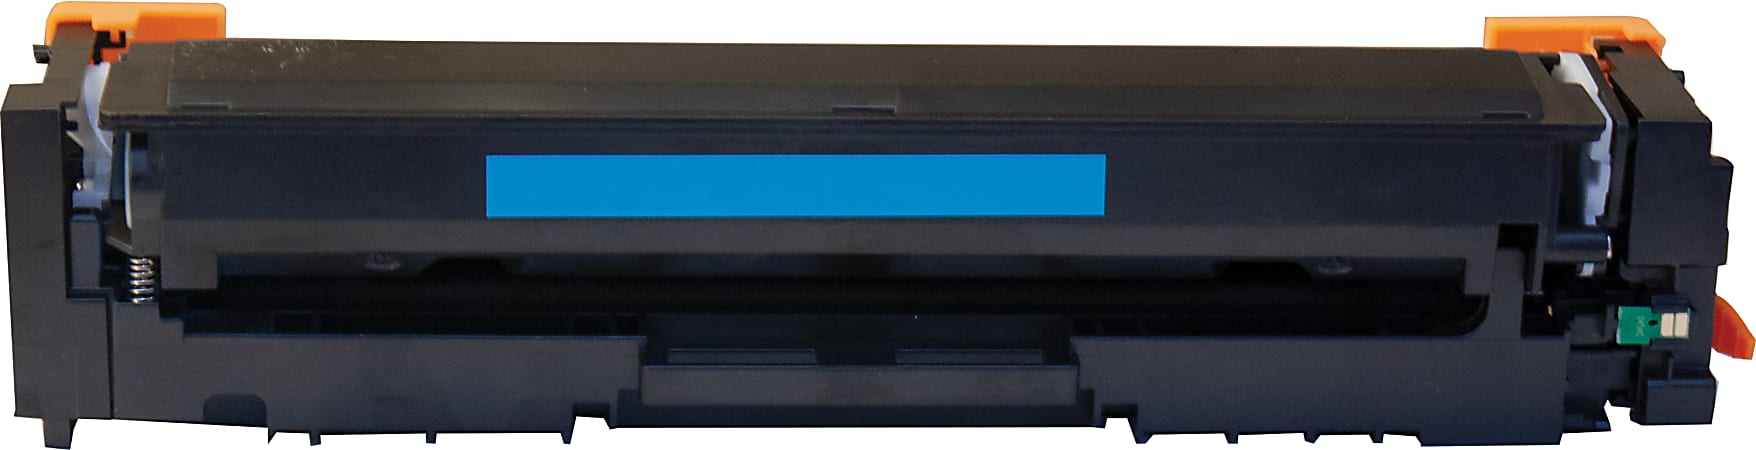 M&A Global Remanufactured Cyan High Yield Toner Cartridge Replacement For HP 201X, CF401X